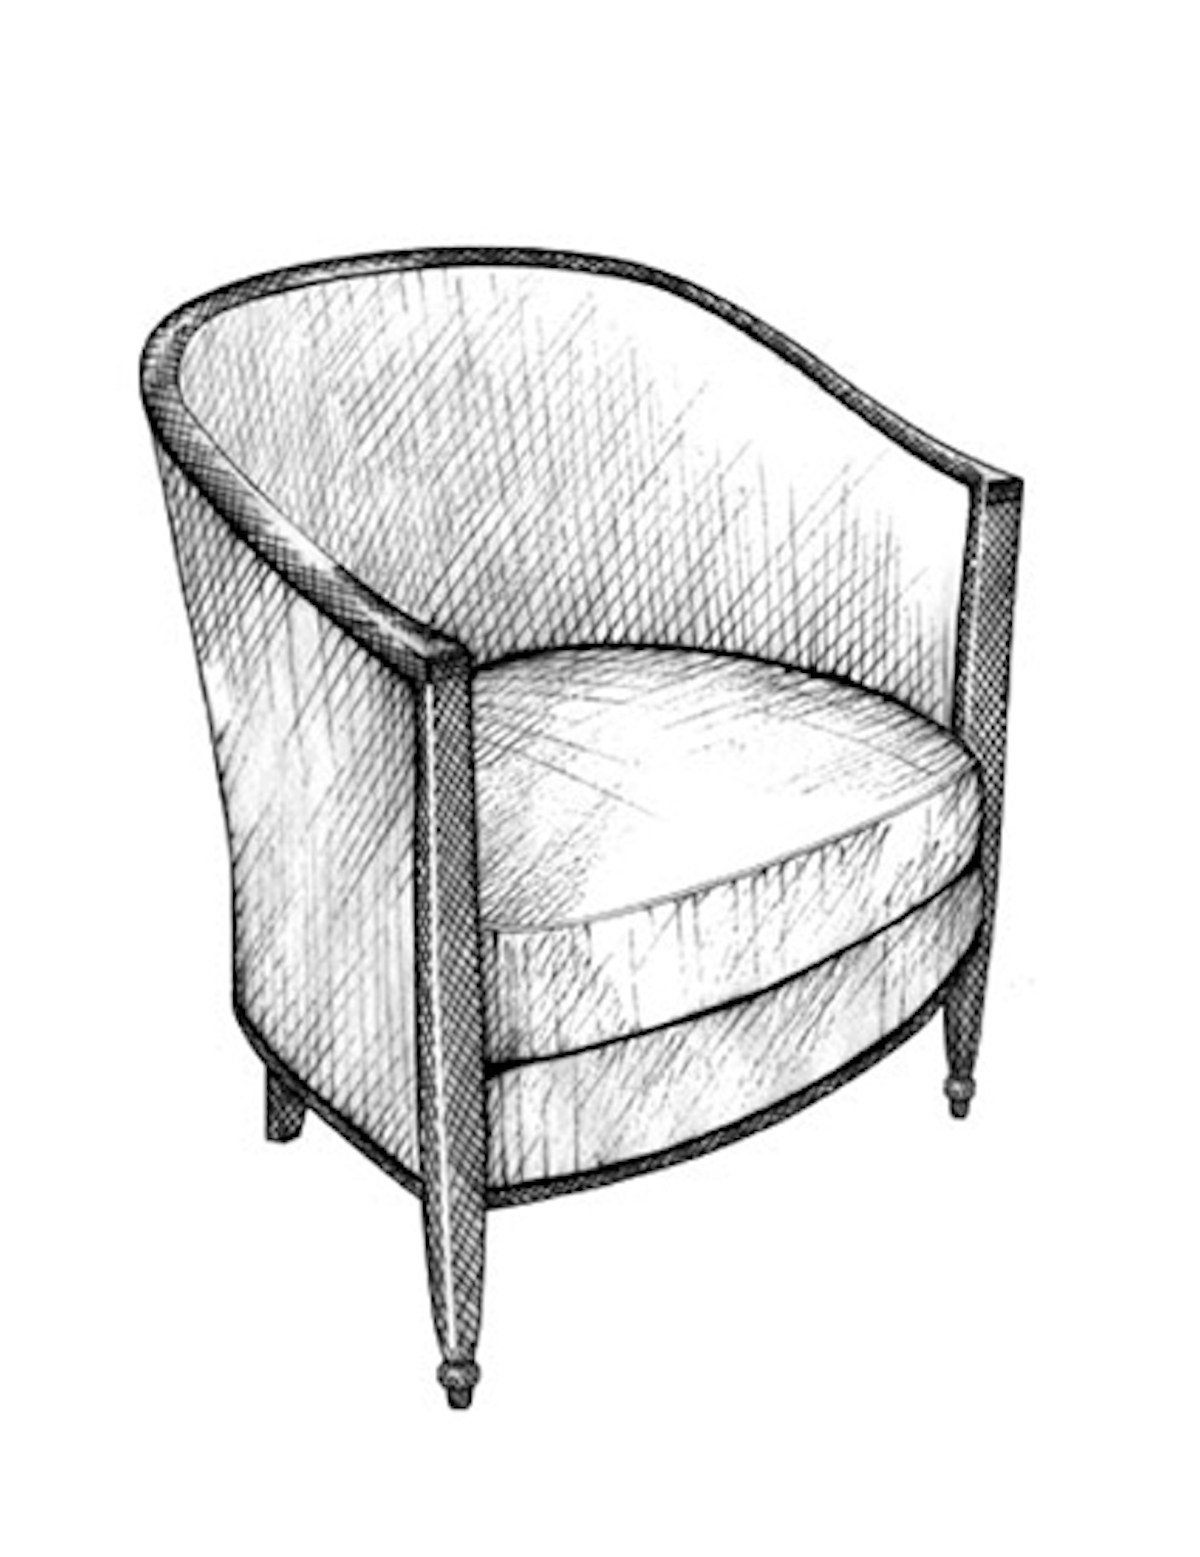 The Best of Chair Design - Top 10 Chair Styles - Art Deco curved armchair